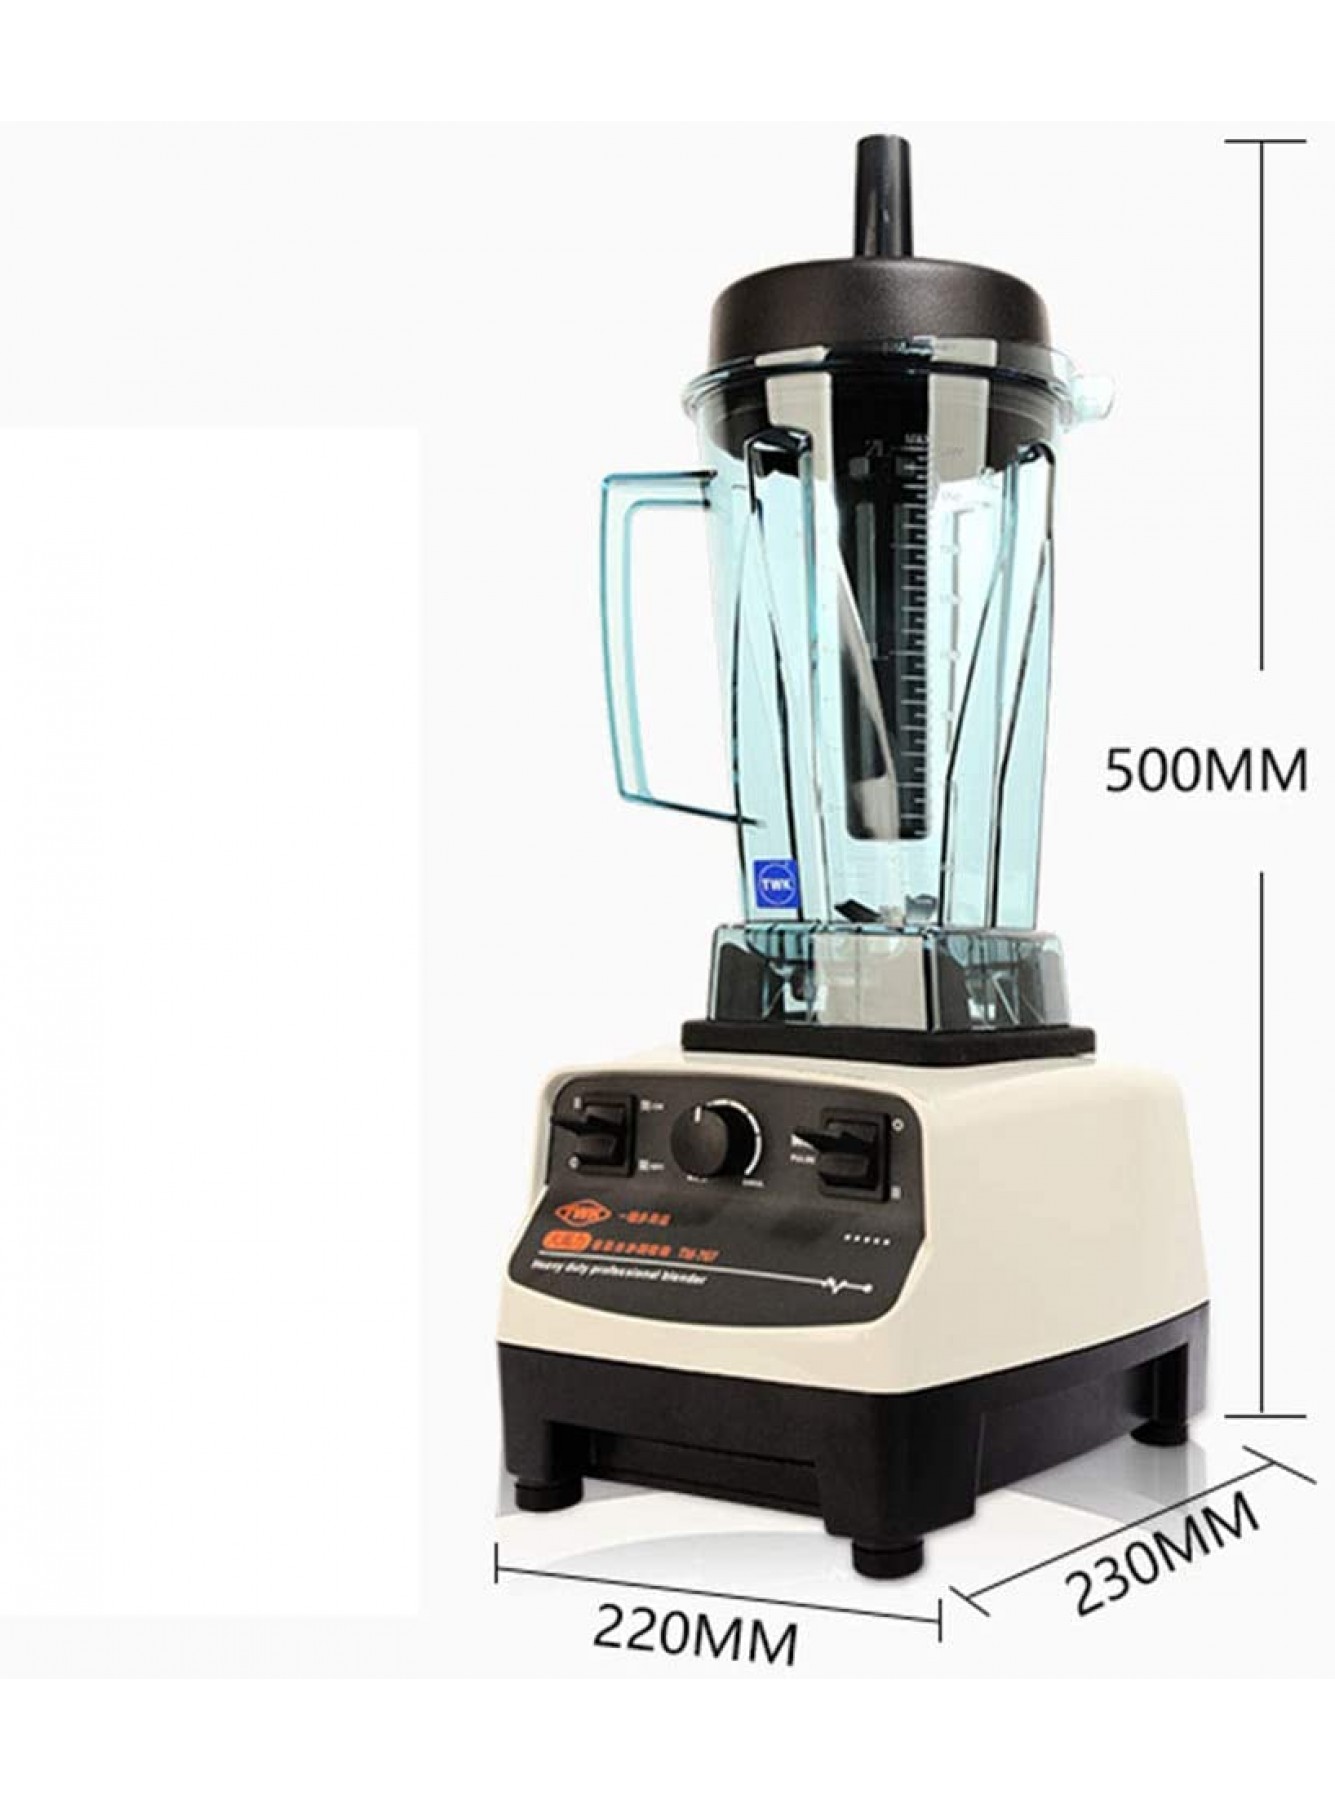 https://www.instagramscraperapi.com/image/cache/data/category_41/countertop-blender-smoothie-blender-2l-pitcher-with-lids-variable-speed-6-leaf-stain--17100-1335x1800.jpg